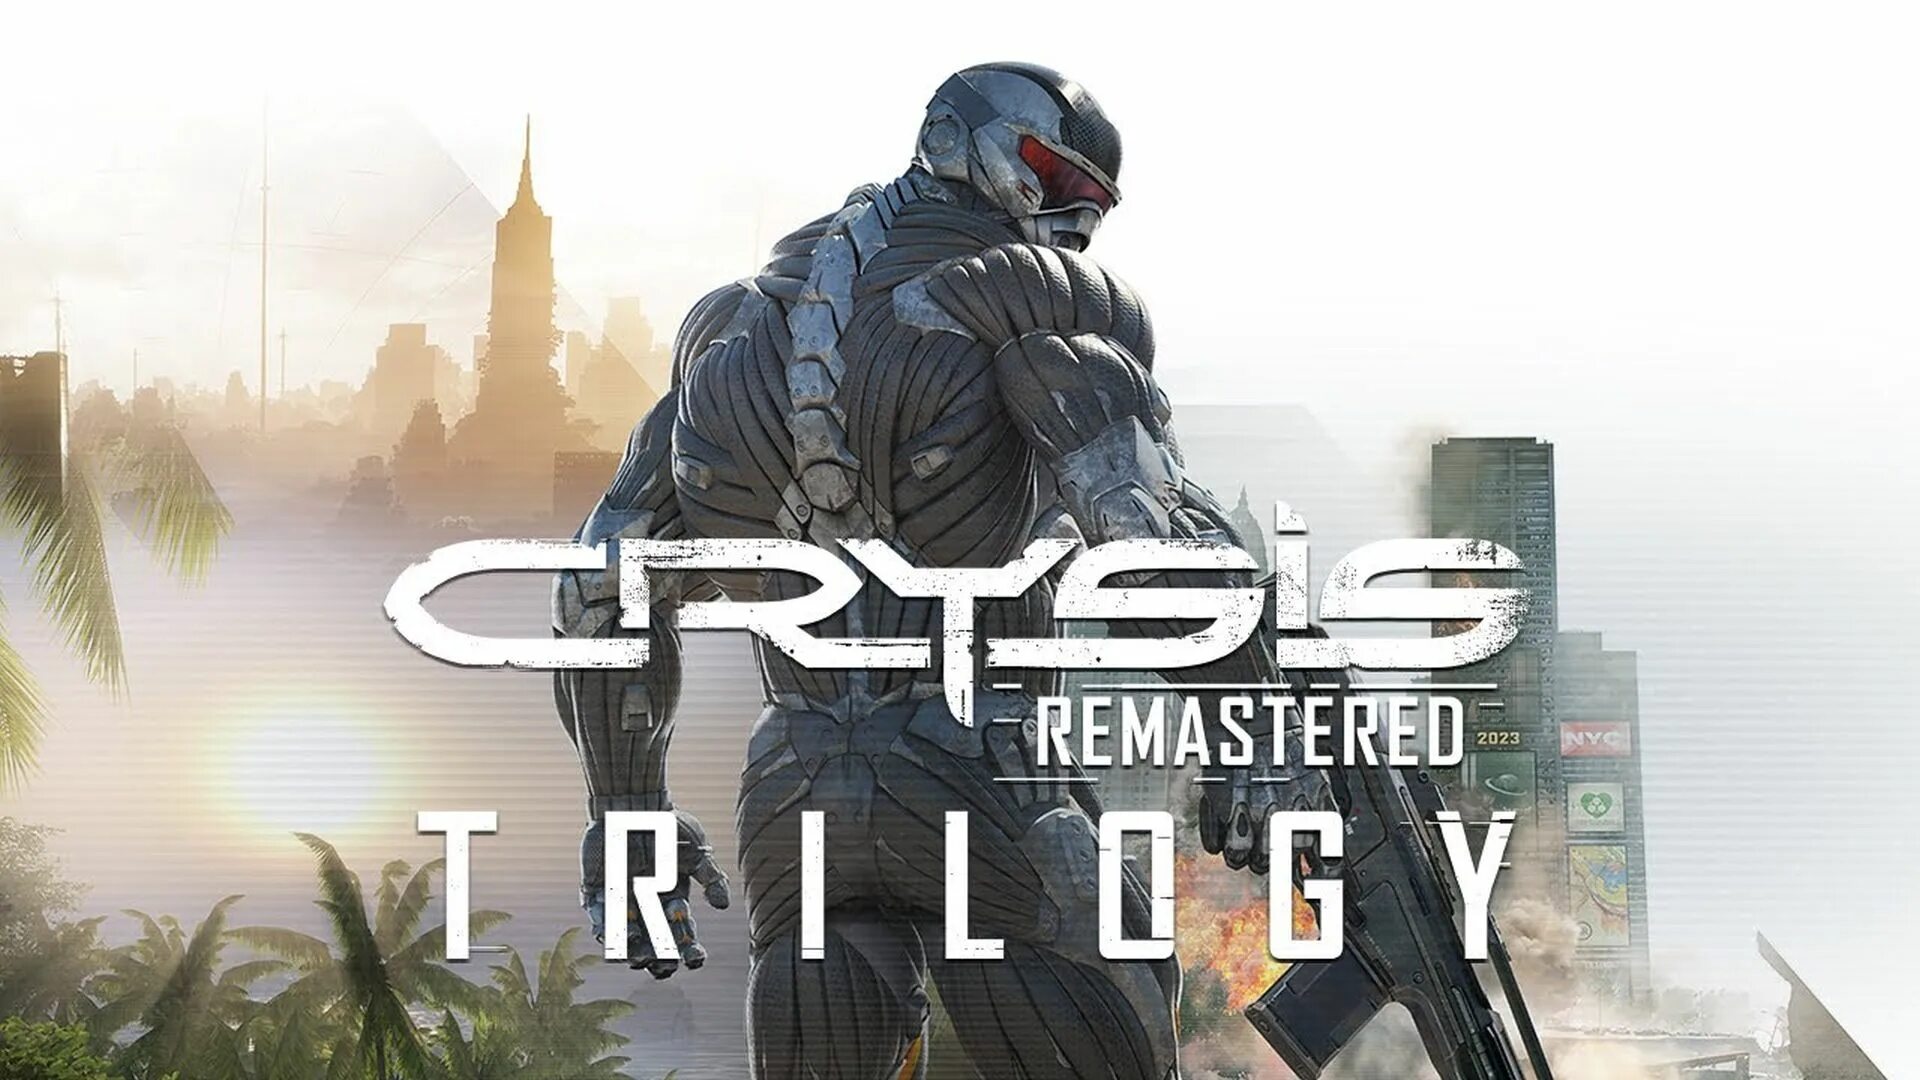 Crysis Remastered Trilogy ps4. Crysis 1 Remastered. Crysis Remastered Trilogy обложка. Crysis Remastered Trilogy Xbox.